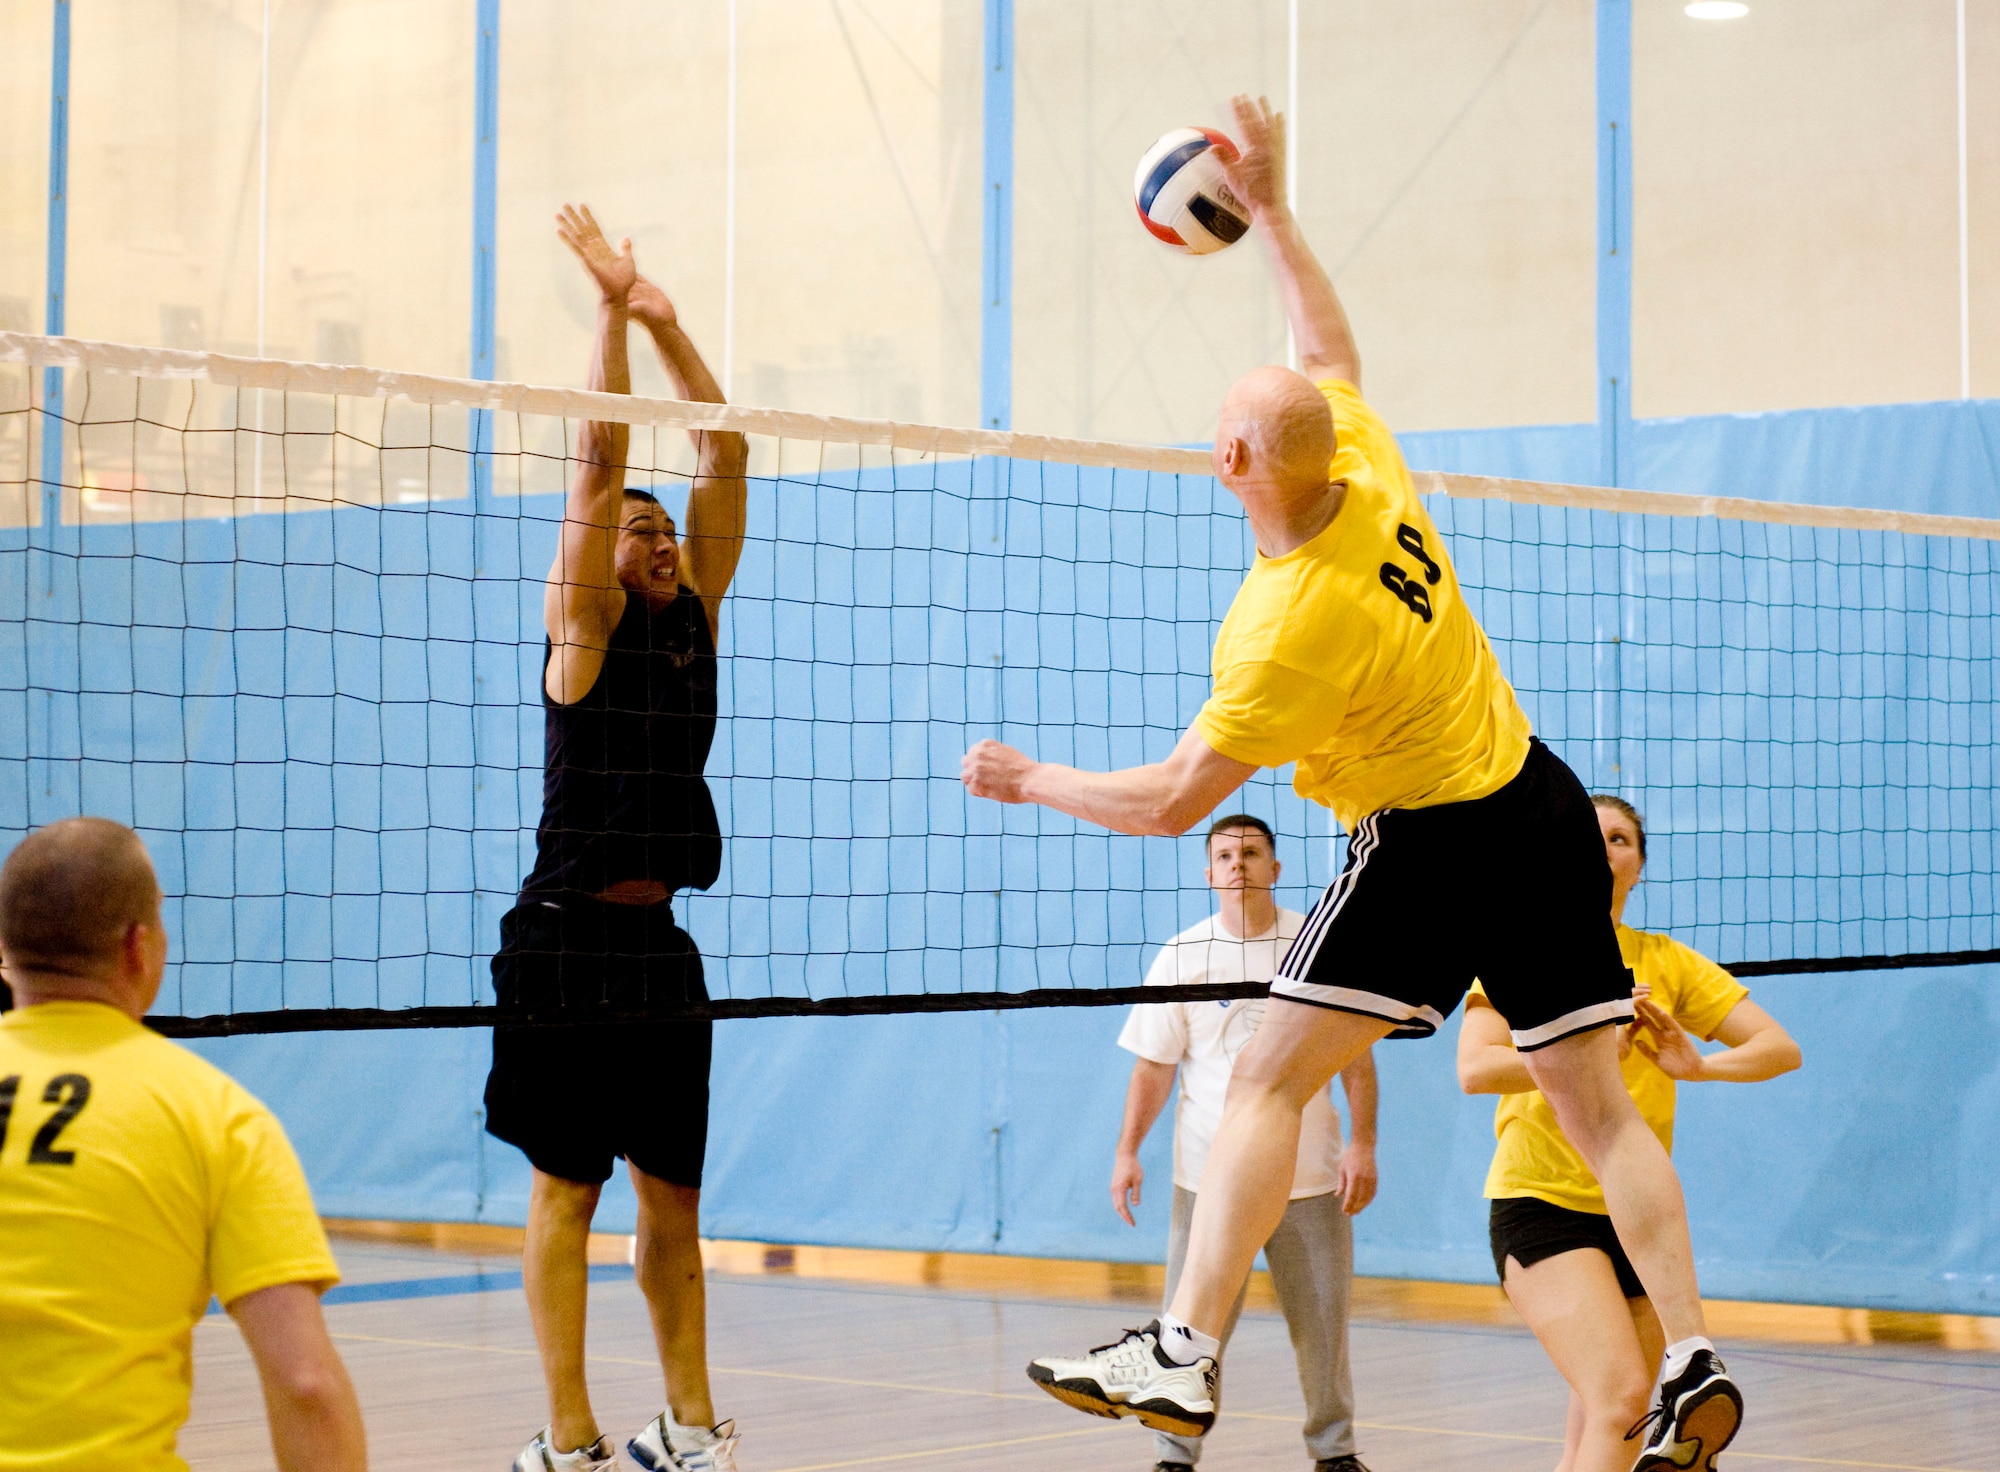 ELMENDORF AIR FORCE BASE, Alaska-- Master Sgt. Rafael Pena-Perez pounds a volleyball into Airman 1st Class Natanael Casas  during a match between  611 Civil Engineer Squadron and the 732 Air Mobility Squadron April 20, 2009. Pena-Perez is from 732 AMS and Casas is from 3 Component Maintenance Squadron playing for 611 CES. The 732 AMS won the match against 611 CES. (U.S. Air Force photo by Senior Airman Jonathan Steffen)  